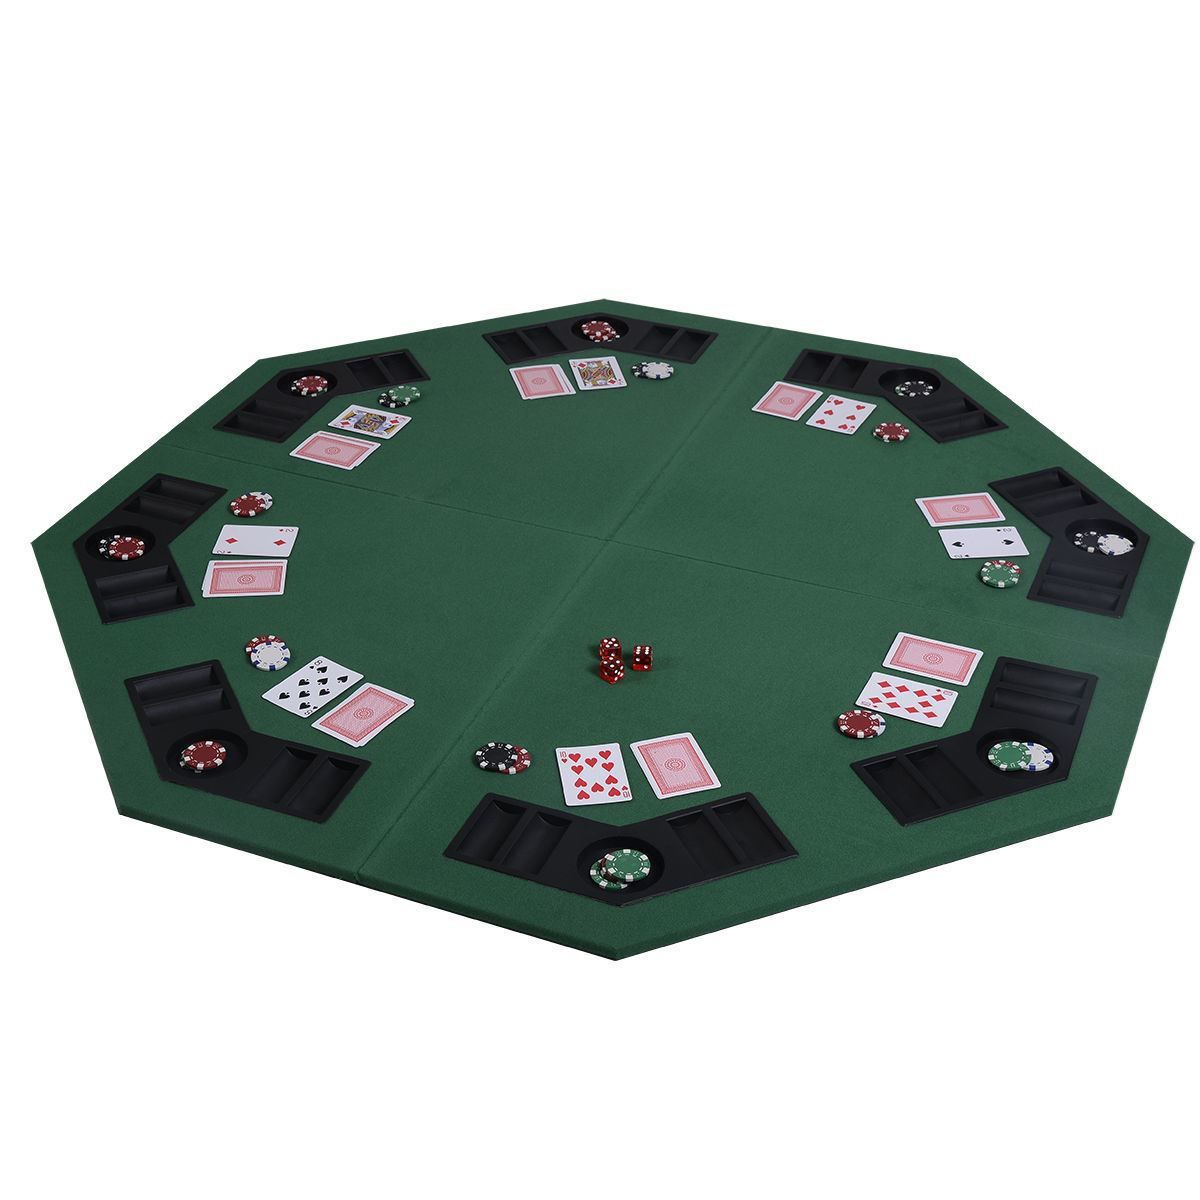 Convenience Boutique / Poker Table Top With Carrying Case In Current 48" 6 – Player Poker Tables (View 1 of 15)